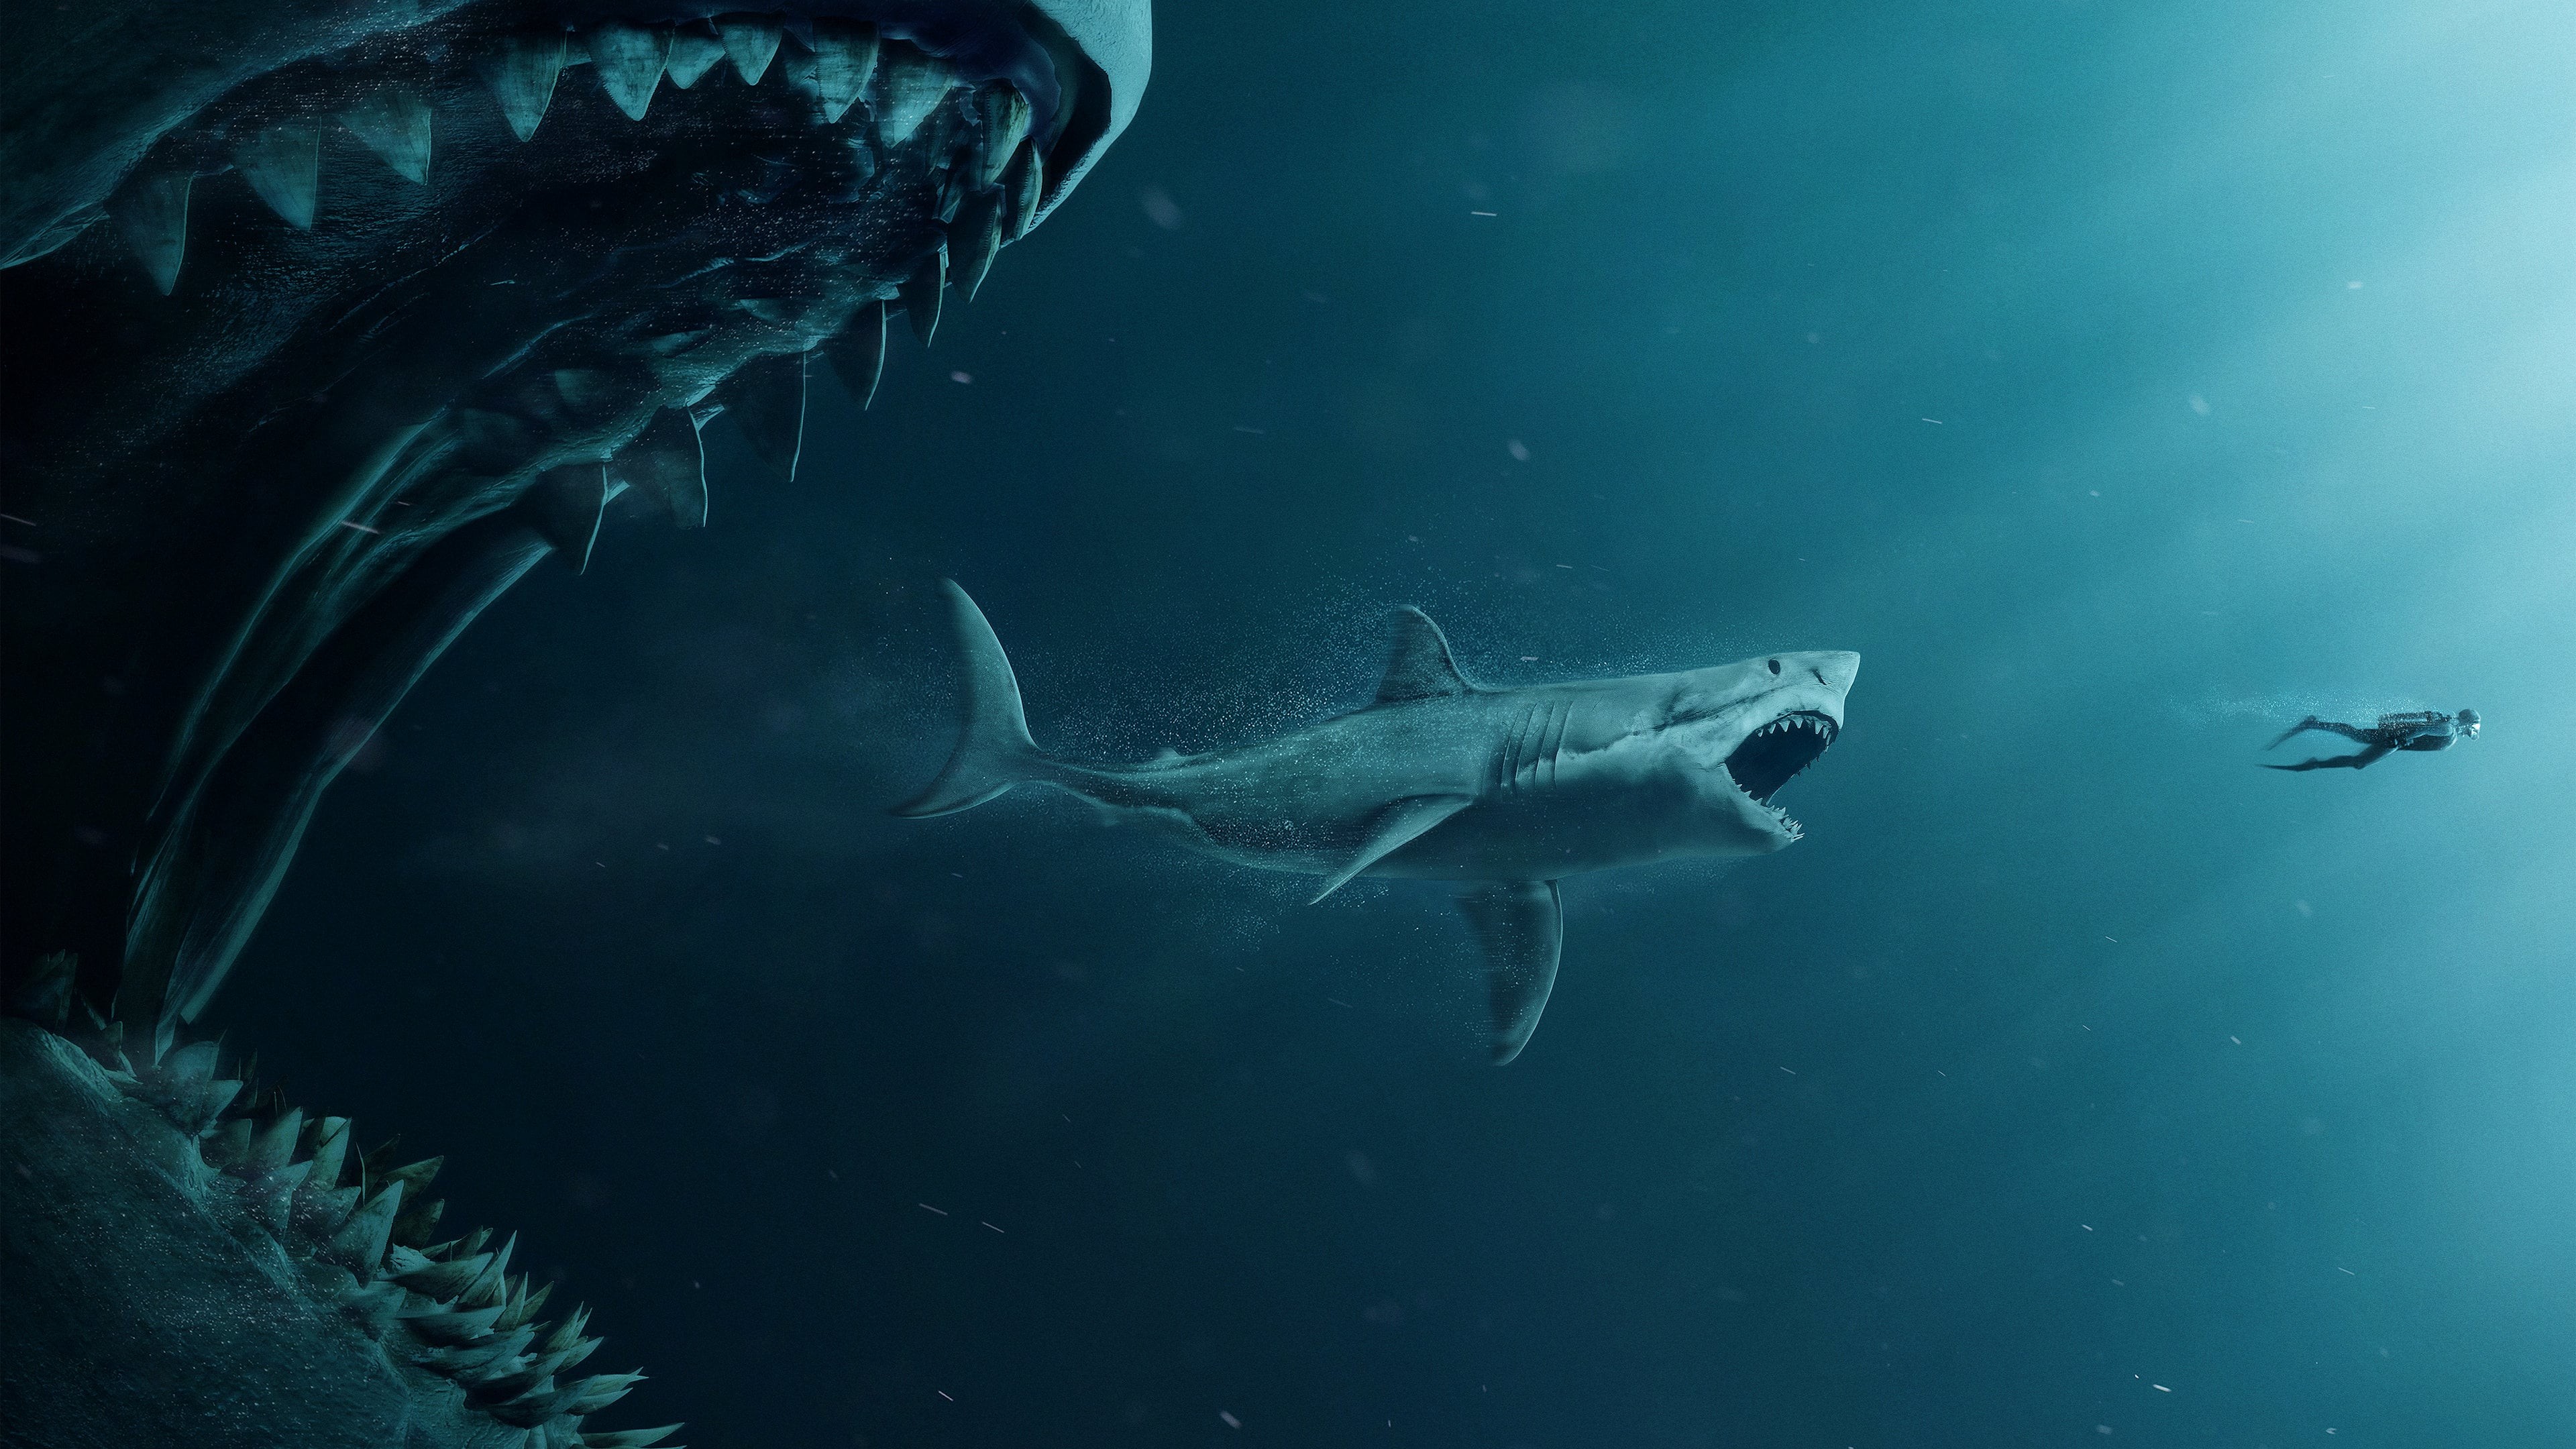 Shark 4K wallpapers for your desktop or mobile screen free and easy to download